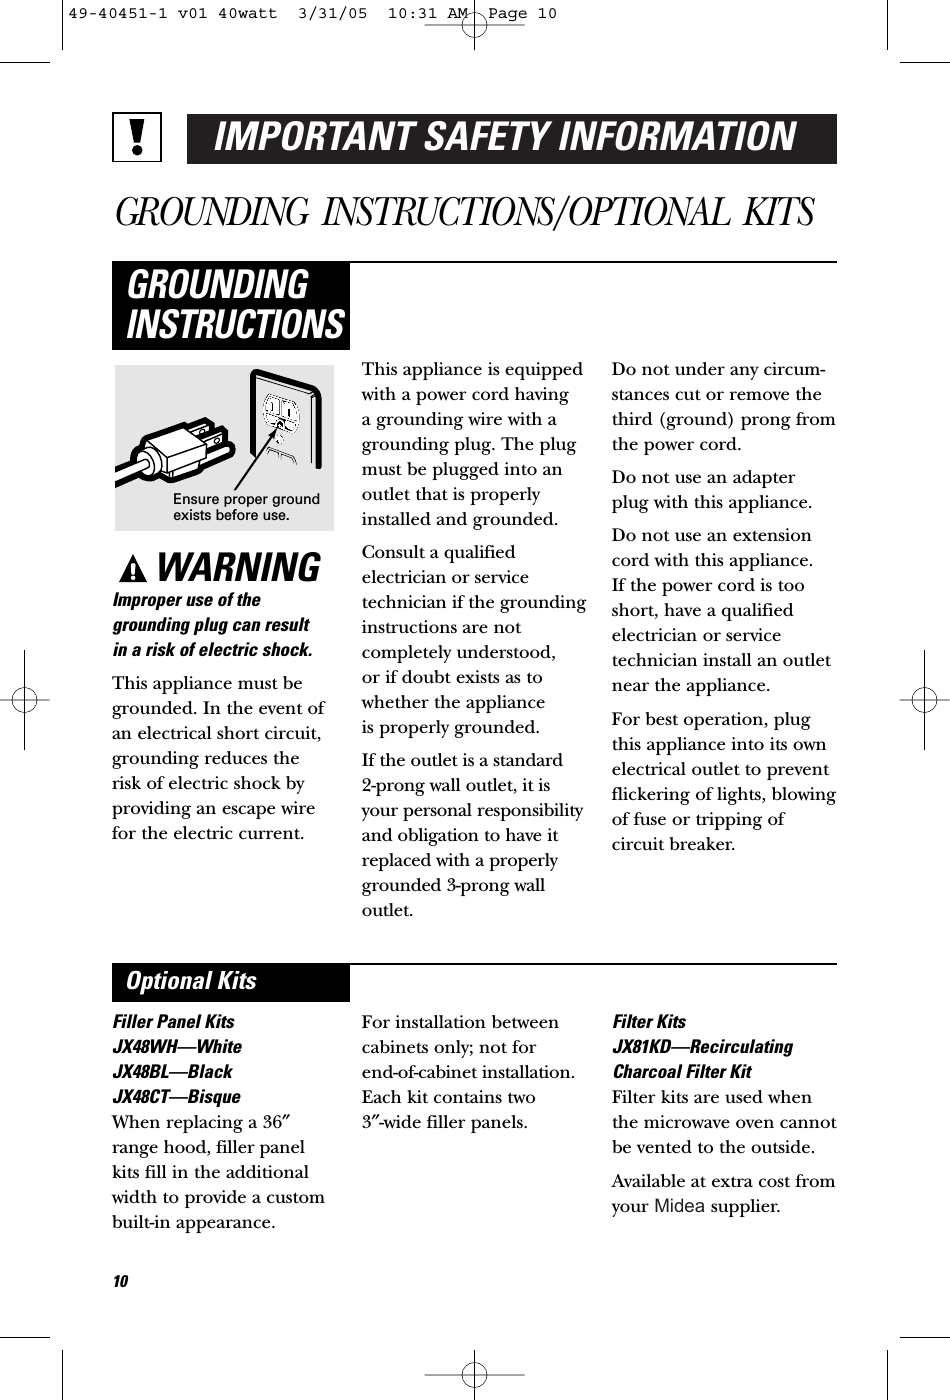 IMPORTANT SAFETY INFORMATIONGROUNDING INSTRUCTIONS/OPTIONAL KITSWARNINGImproper use of thegrounding plug can result in a risk of electric shock.This appliance must begrounded. In the event ofan electrical short circuit,grounding reduces the risk of electric shock byproviding an escape wirefor the electric current. This appliance is equippedwith a power cord having a grounding wire with agrounding plug. The plugmust be plugged into anoutlet that is properlyinstalled and grounded.Consult a qualifiedelectrician or servicetechnician if the groundinginstructions are notcompletely understood, or if doubt exists as towhether the appliance is properly grounded.If the outlet is a standard 2-prong wall outlet, it isyour personal responsibilityand obligation to have itreplaced with a properlygrounded 3-prong walloutlet.Do not under any circum-stances cut or remove thethird (ground) prong fromthe power cord.Do not use an adapterplug with this appliance.Do not use an extensioncord with this appliance. If the power cord is tooshort, have a qualifiedelectrician or servicetechnician install an outletnear the appliance.For best operation, plugthis appliance into its ownelectrical outlet to preventflickering of lights, blowingof fuse or tripping ofcircuit breaker.GROUNDINGINSTRUCTIONSFiller Panel KitsJX48WH—WhiteJX48BL—BlackJX48CT—BisqueWhen replacing a 36″range hood, filler panelkits fill in the additionalwidth to provide a custombuilt-in appearance. For installation betweencabinets only; not for end-of-cabinet installation.Each kit contains two 3″-wide filler panels.Filter KitsJX81KD—RecirculatingCharcoal Filter KitFilter kits are used whenthe microwave oven cannotbe vented to the outside.Available at extra cost fromyour   supplier.Optional KitsEnsure proper groundexists before use.1049-40451-1 v01 40watt  3/31/05  10:31 AM  Page 10Midea